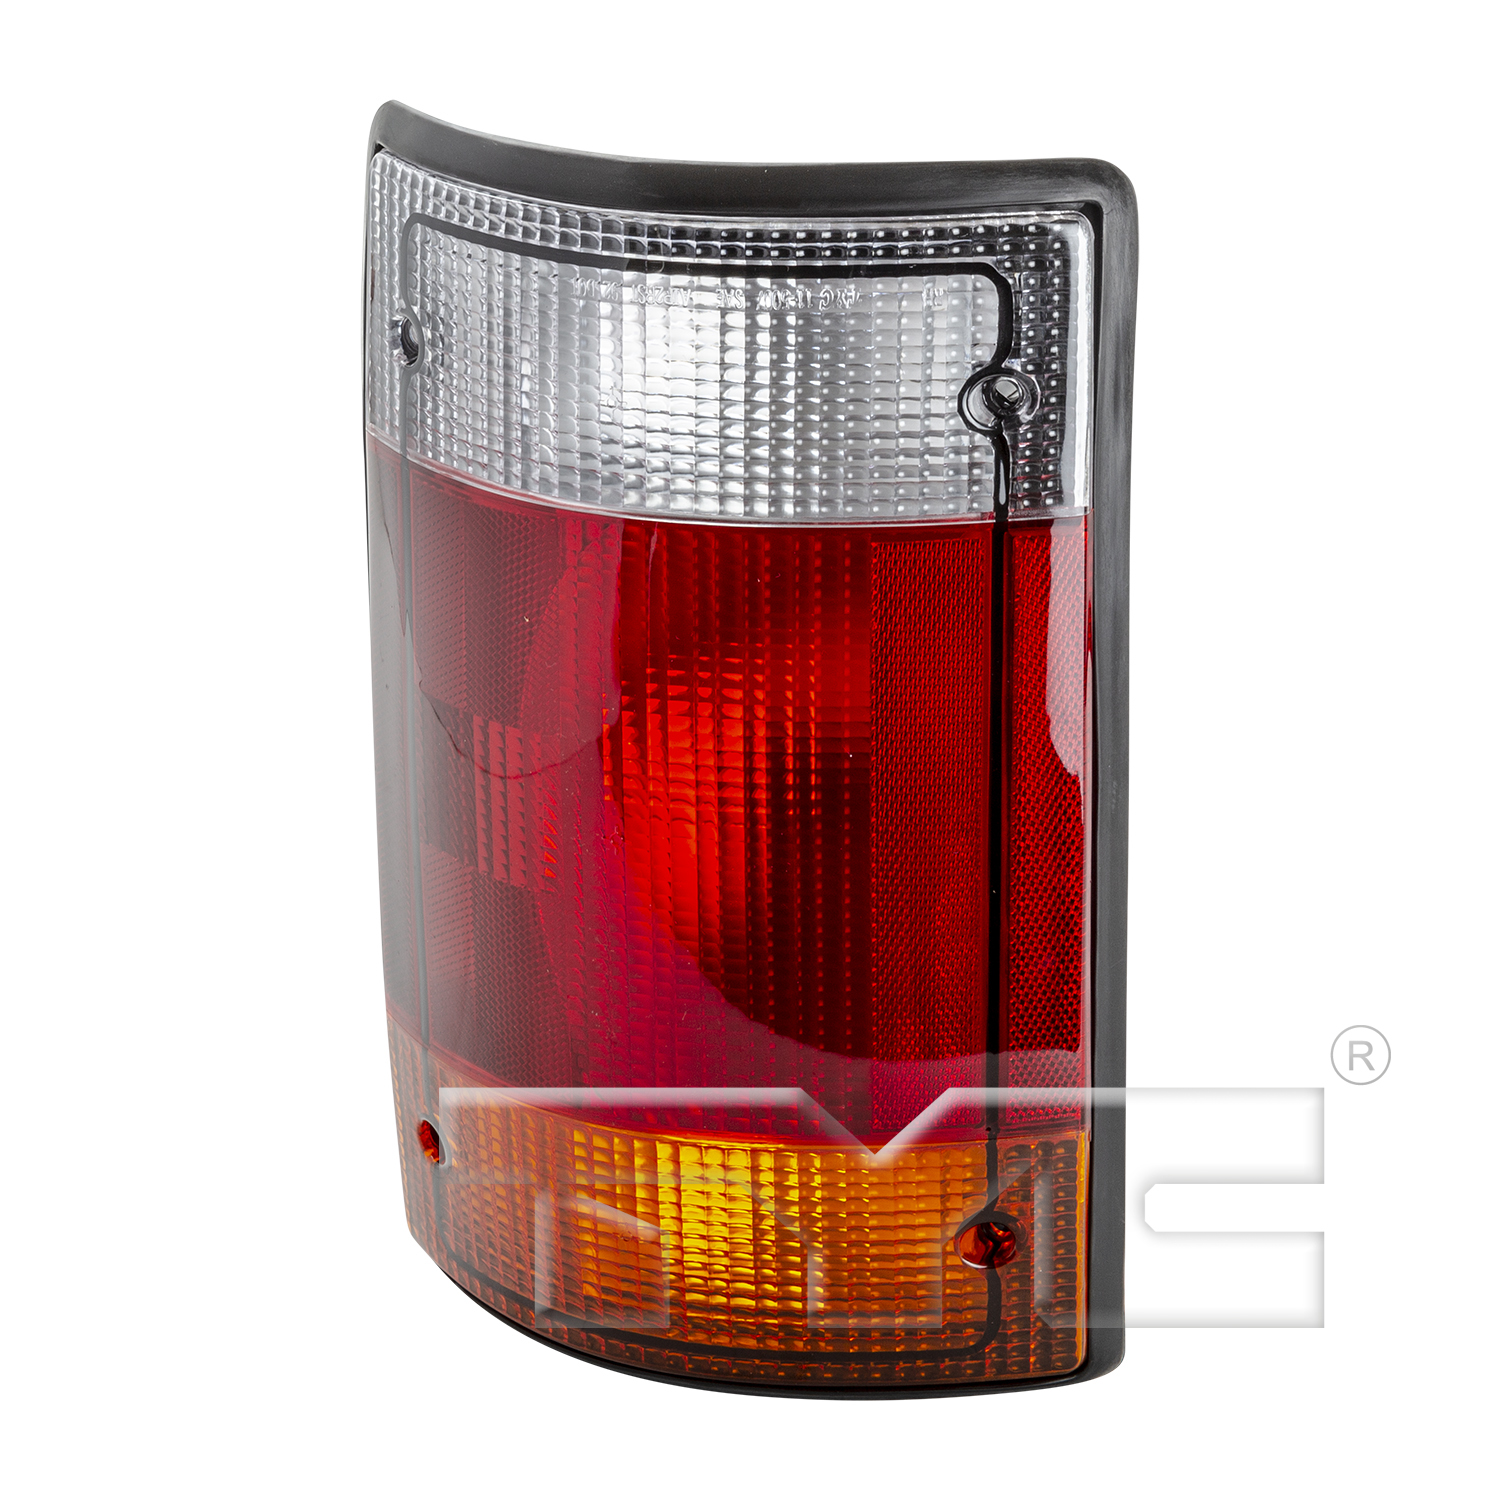 Aftermarket TAILLIGHTS for FORD - E-350 ECONOLINE, E-350 ECONOLINE,92-94,RT Taillamp assy